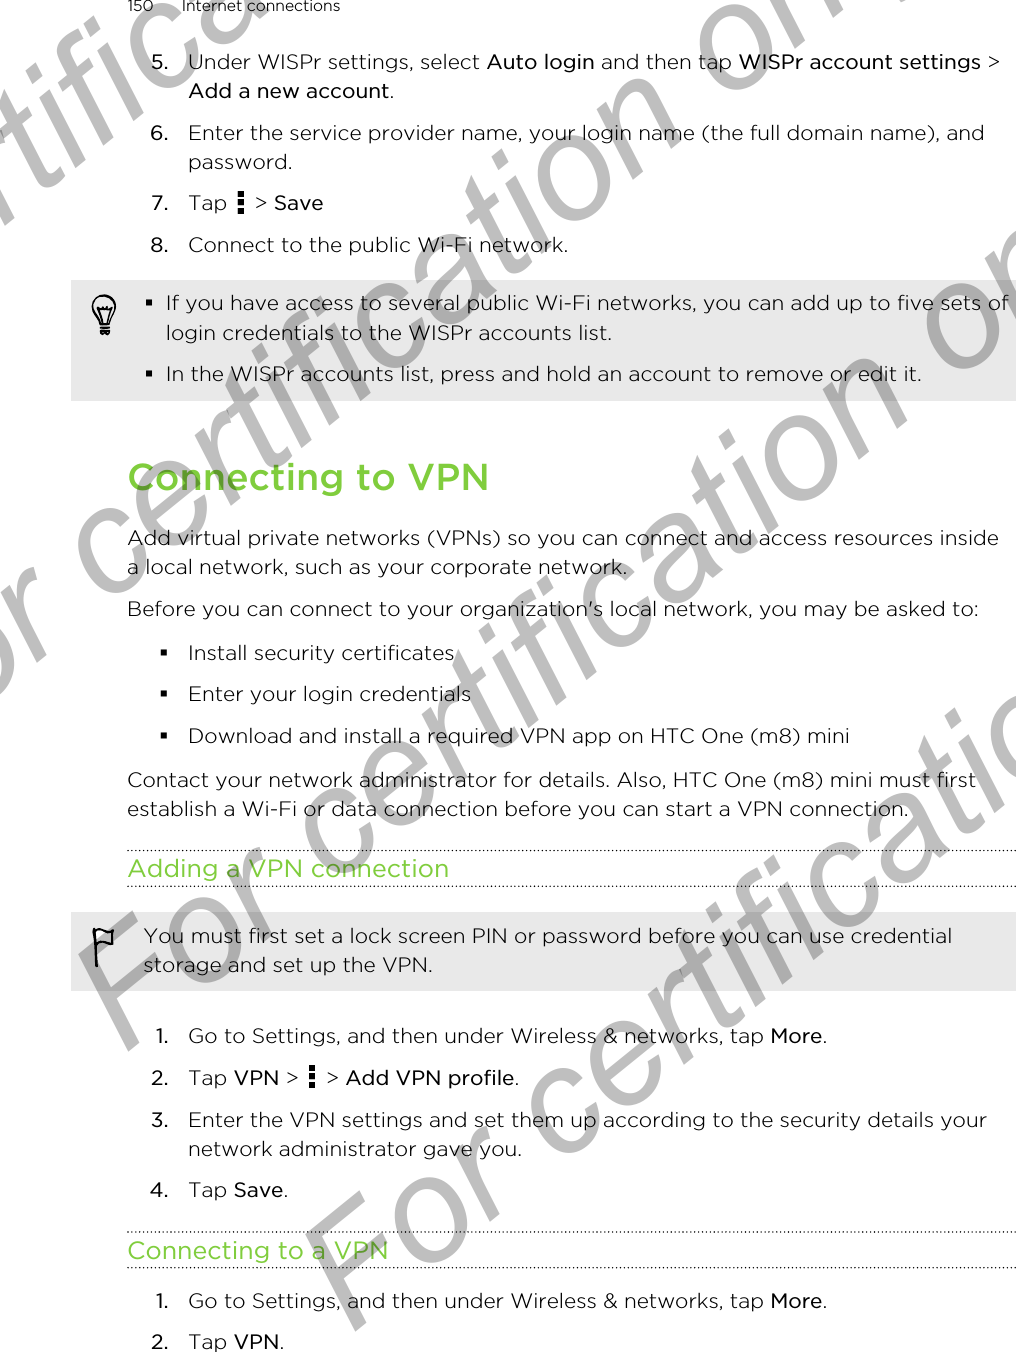 5. Under WISPr settings, select Auto login and then tap WISPr account settings &gt;Add a new account.6. Enter the service provider name, your login name (the full domain name), andpassword.7. Tap   &gt; Save8. Connect to the public Wi-Fi network.§If you have access to several public Wi-Fi networks, you can add up to five sets oflogin credentials to the WISPr accounts list.§In the WISPr accounts list, press and hold an account to remove or edit it.Connecting to VPNAdd virtual private networks (VPNs) so you can connect and access resources insidea local network, such as your corporate network.Before you can connect to your organization&apos;s local network, you may be asked to:§Install security certificates§Enter your login credentials§Download and install a required VPN app on HTC One (m8) miniContact your network administrator for details. Also, HTC One (m8) mini must firstestablish a Wi-Fi or data connection before you can start a VPN connection.Adding a VPN connectionYou must first set a lock screen PIN or password before you can use credentialstorage and set up the VPN.1. Go to Settings, and then under Wireless &amp; networks, tap More.2. Tap VPN &gt;   &gt; Add VPN profile.3. Enter the VPN settings and set them up according to the security details yournetwork administrator gave you.4. Tap Save.Connecting to a VPN1. Go to Settings, and then under Wireless &amp; networks, tap More.2. Tap VPN.150 Internet connectionsFor certification only  For certification only  For certification only  For certification only 